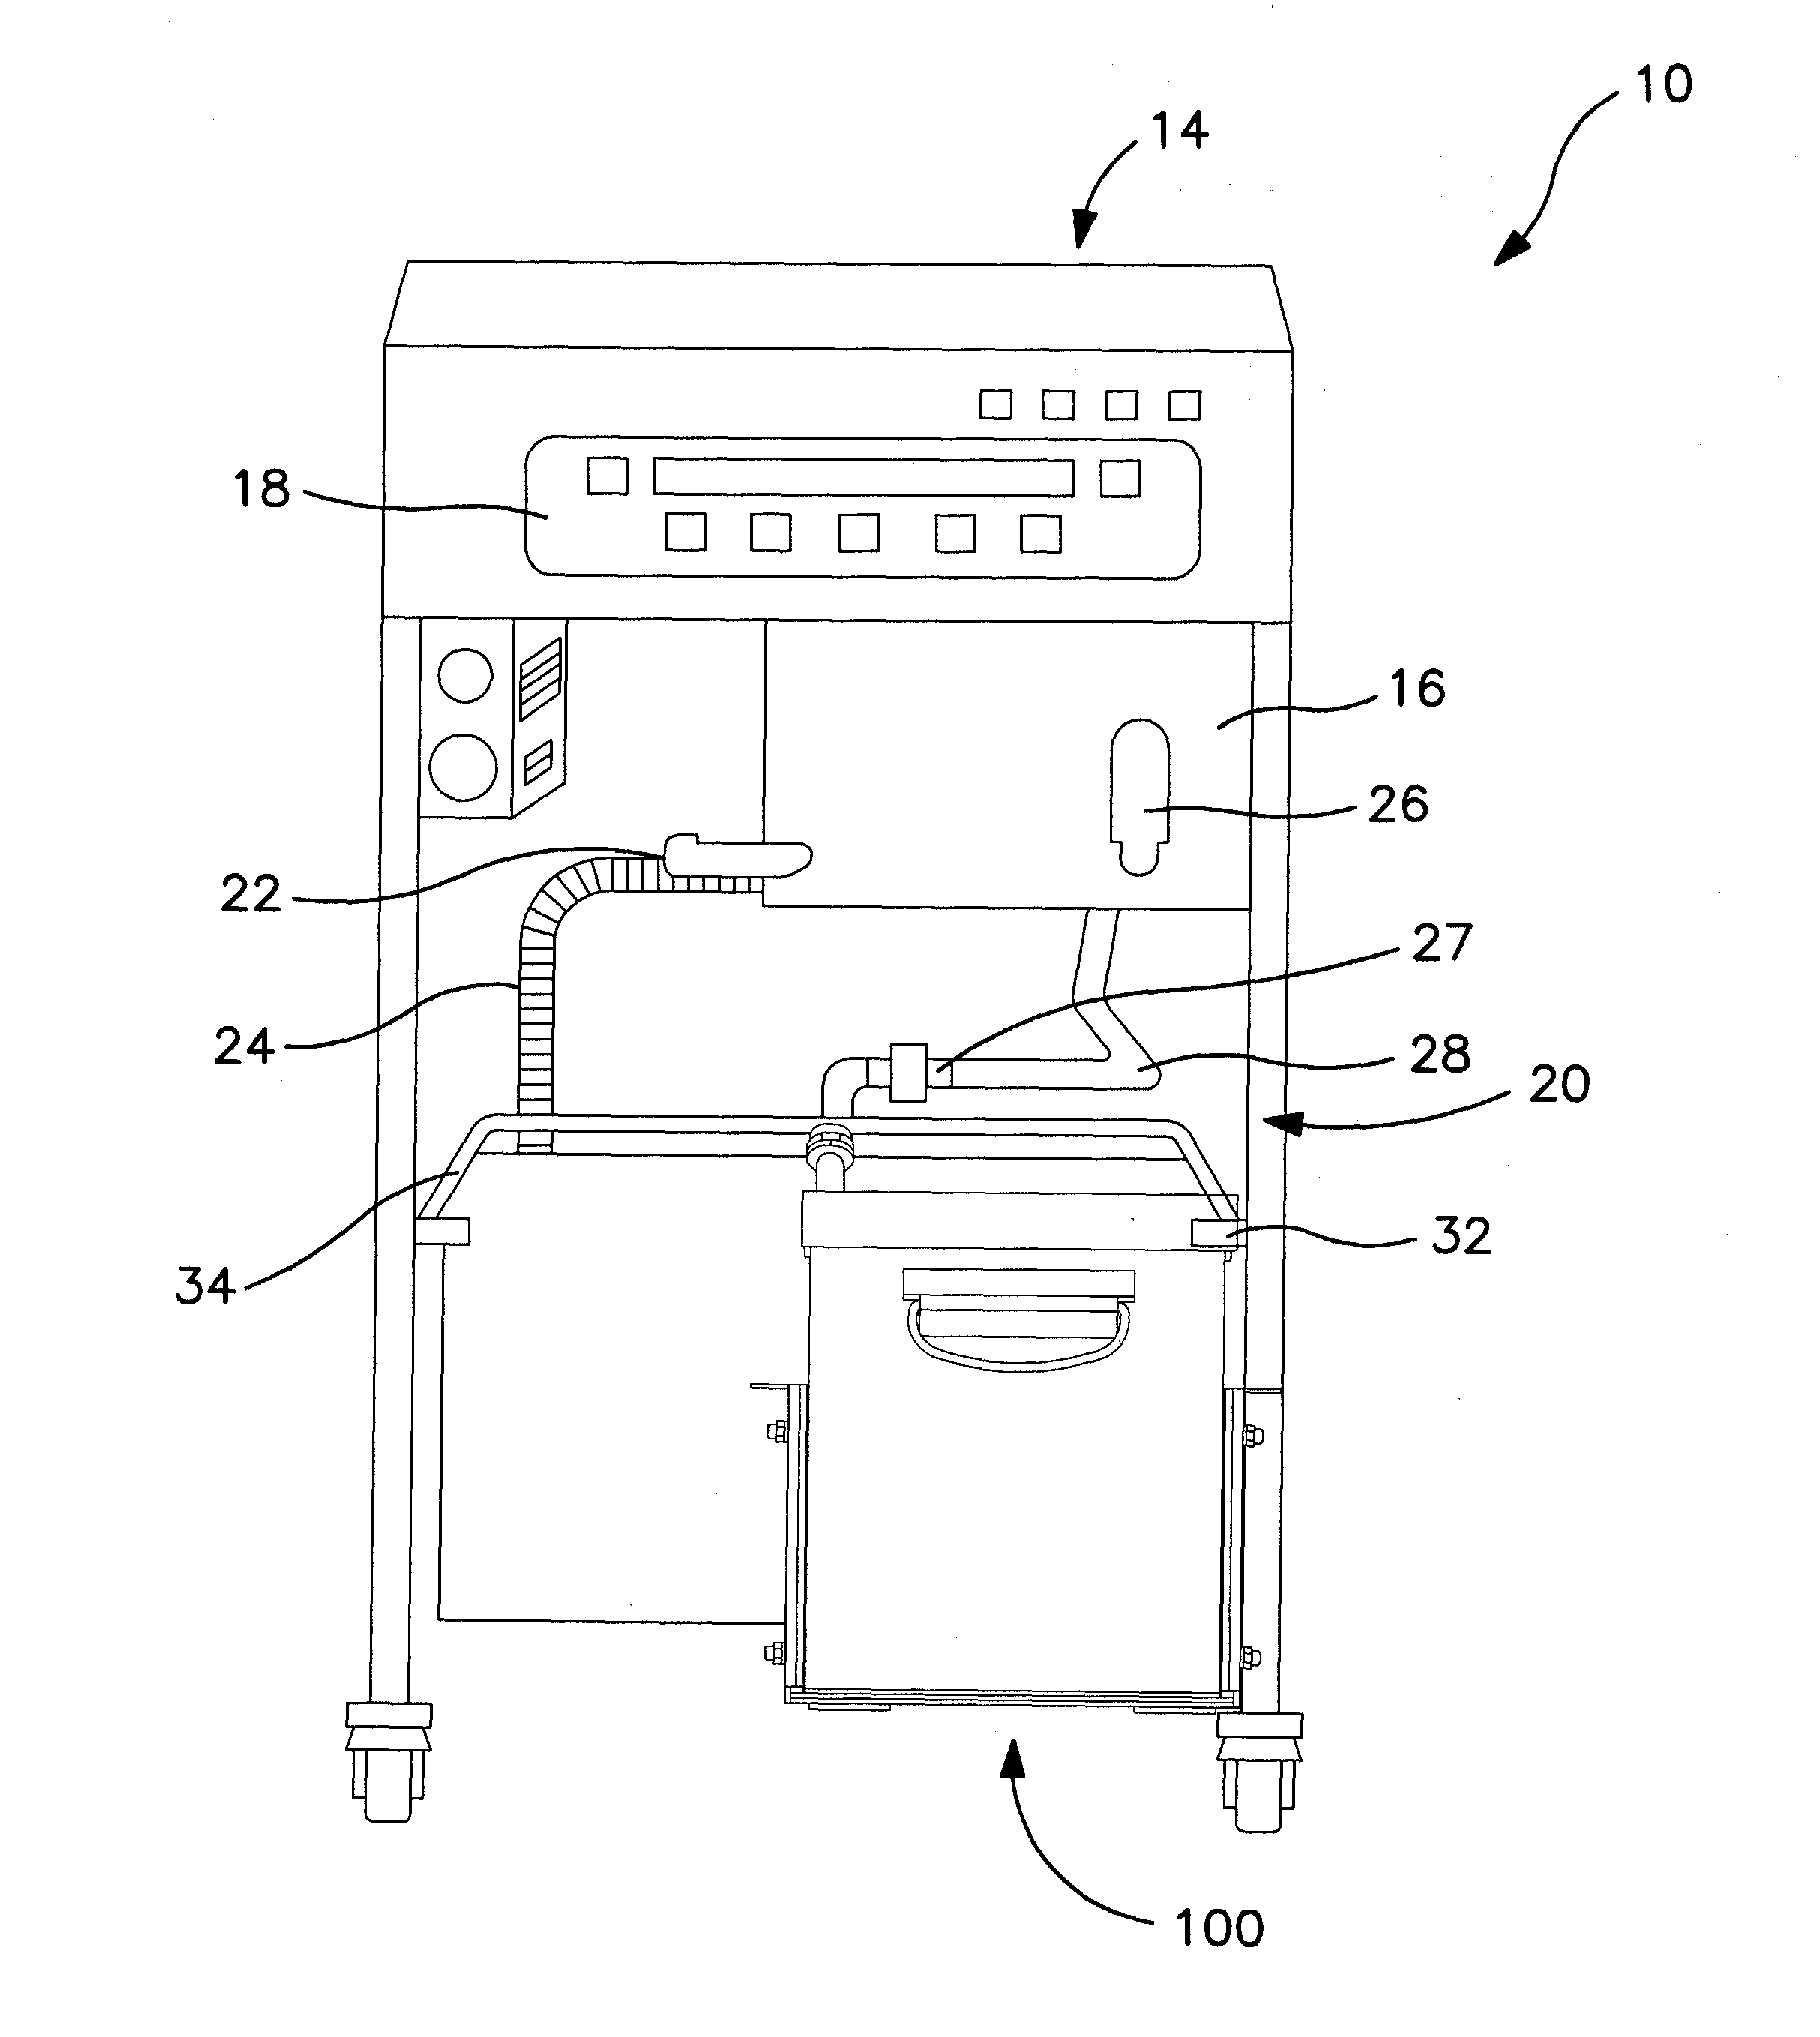 Systems and methods for melting and maintaining temperature of semi-solid cooking media